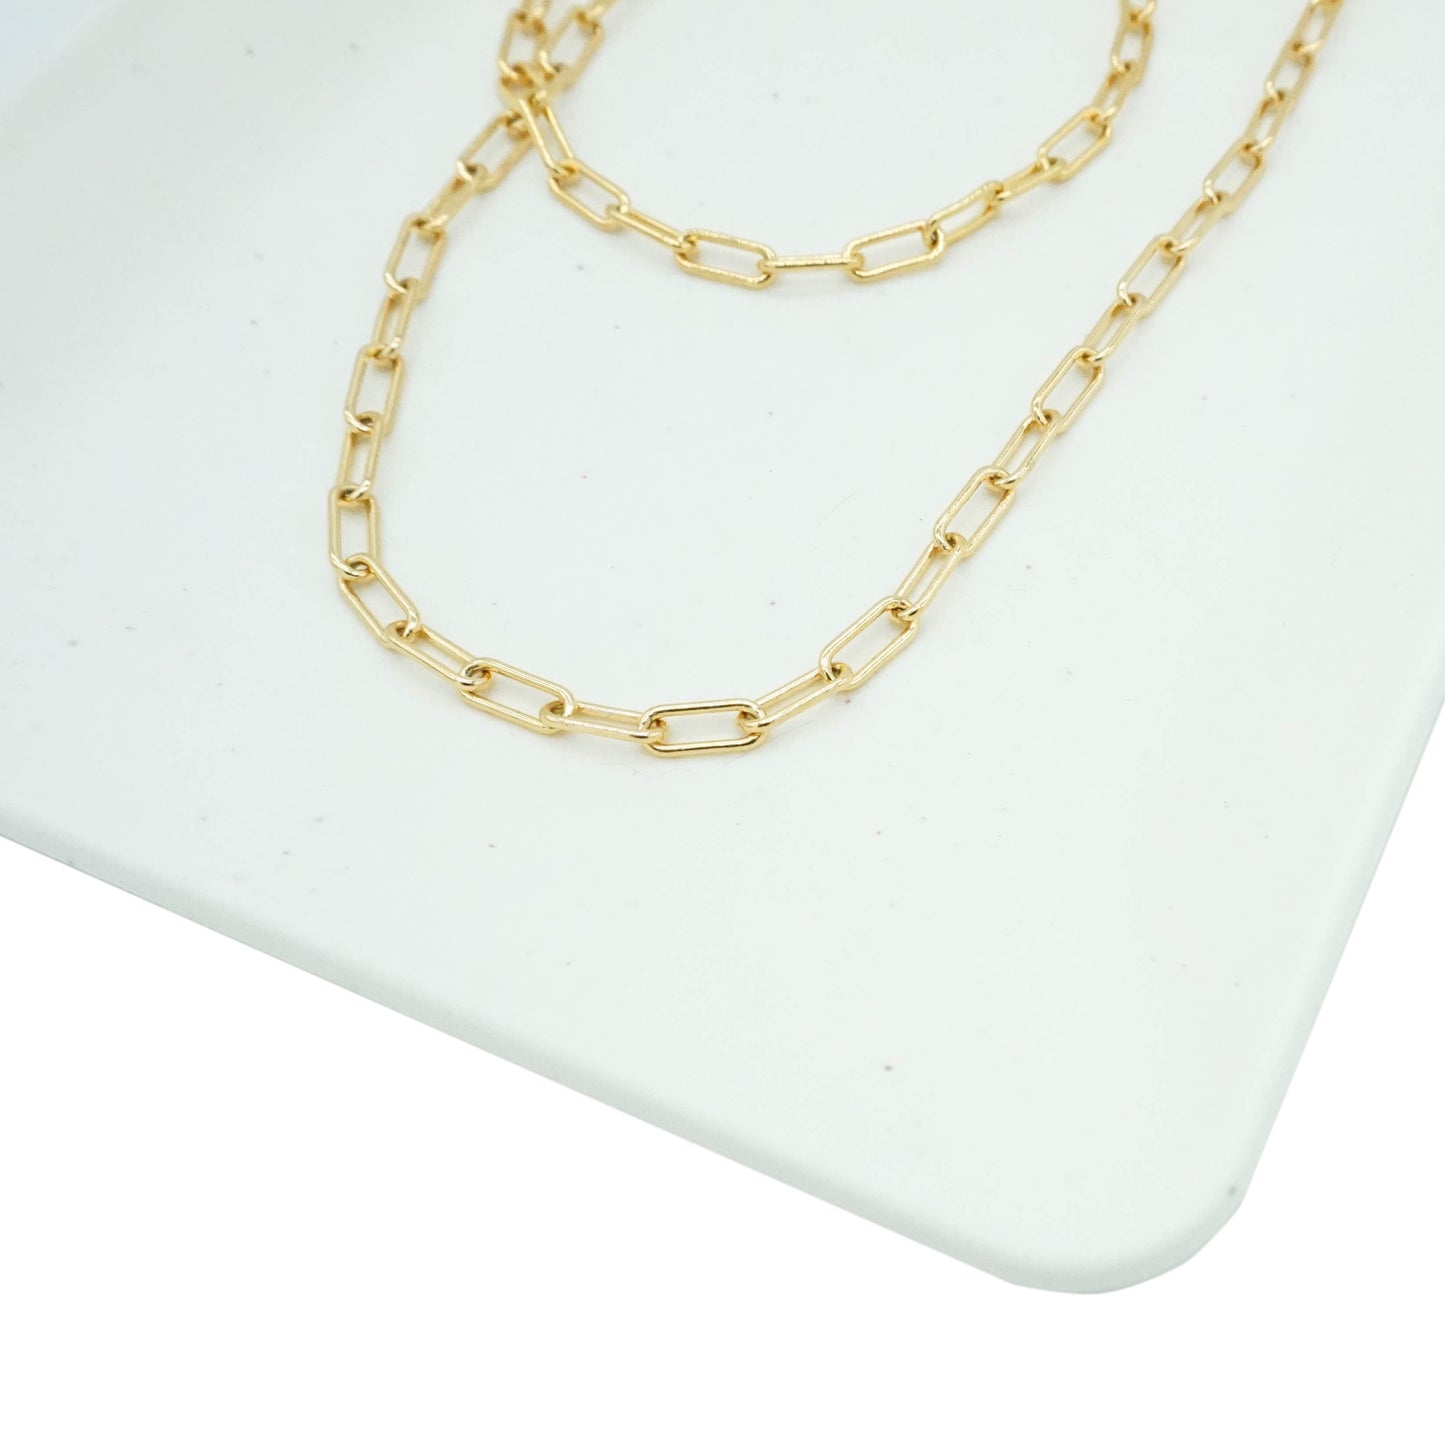 Gold Chain Necklace - GOLDEN HOUR